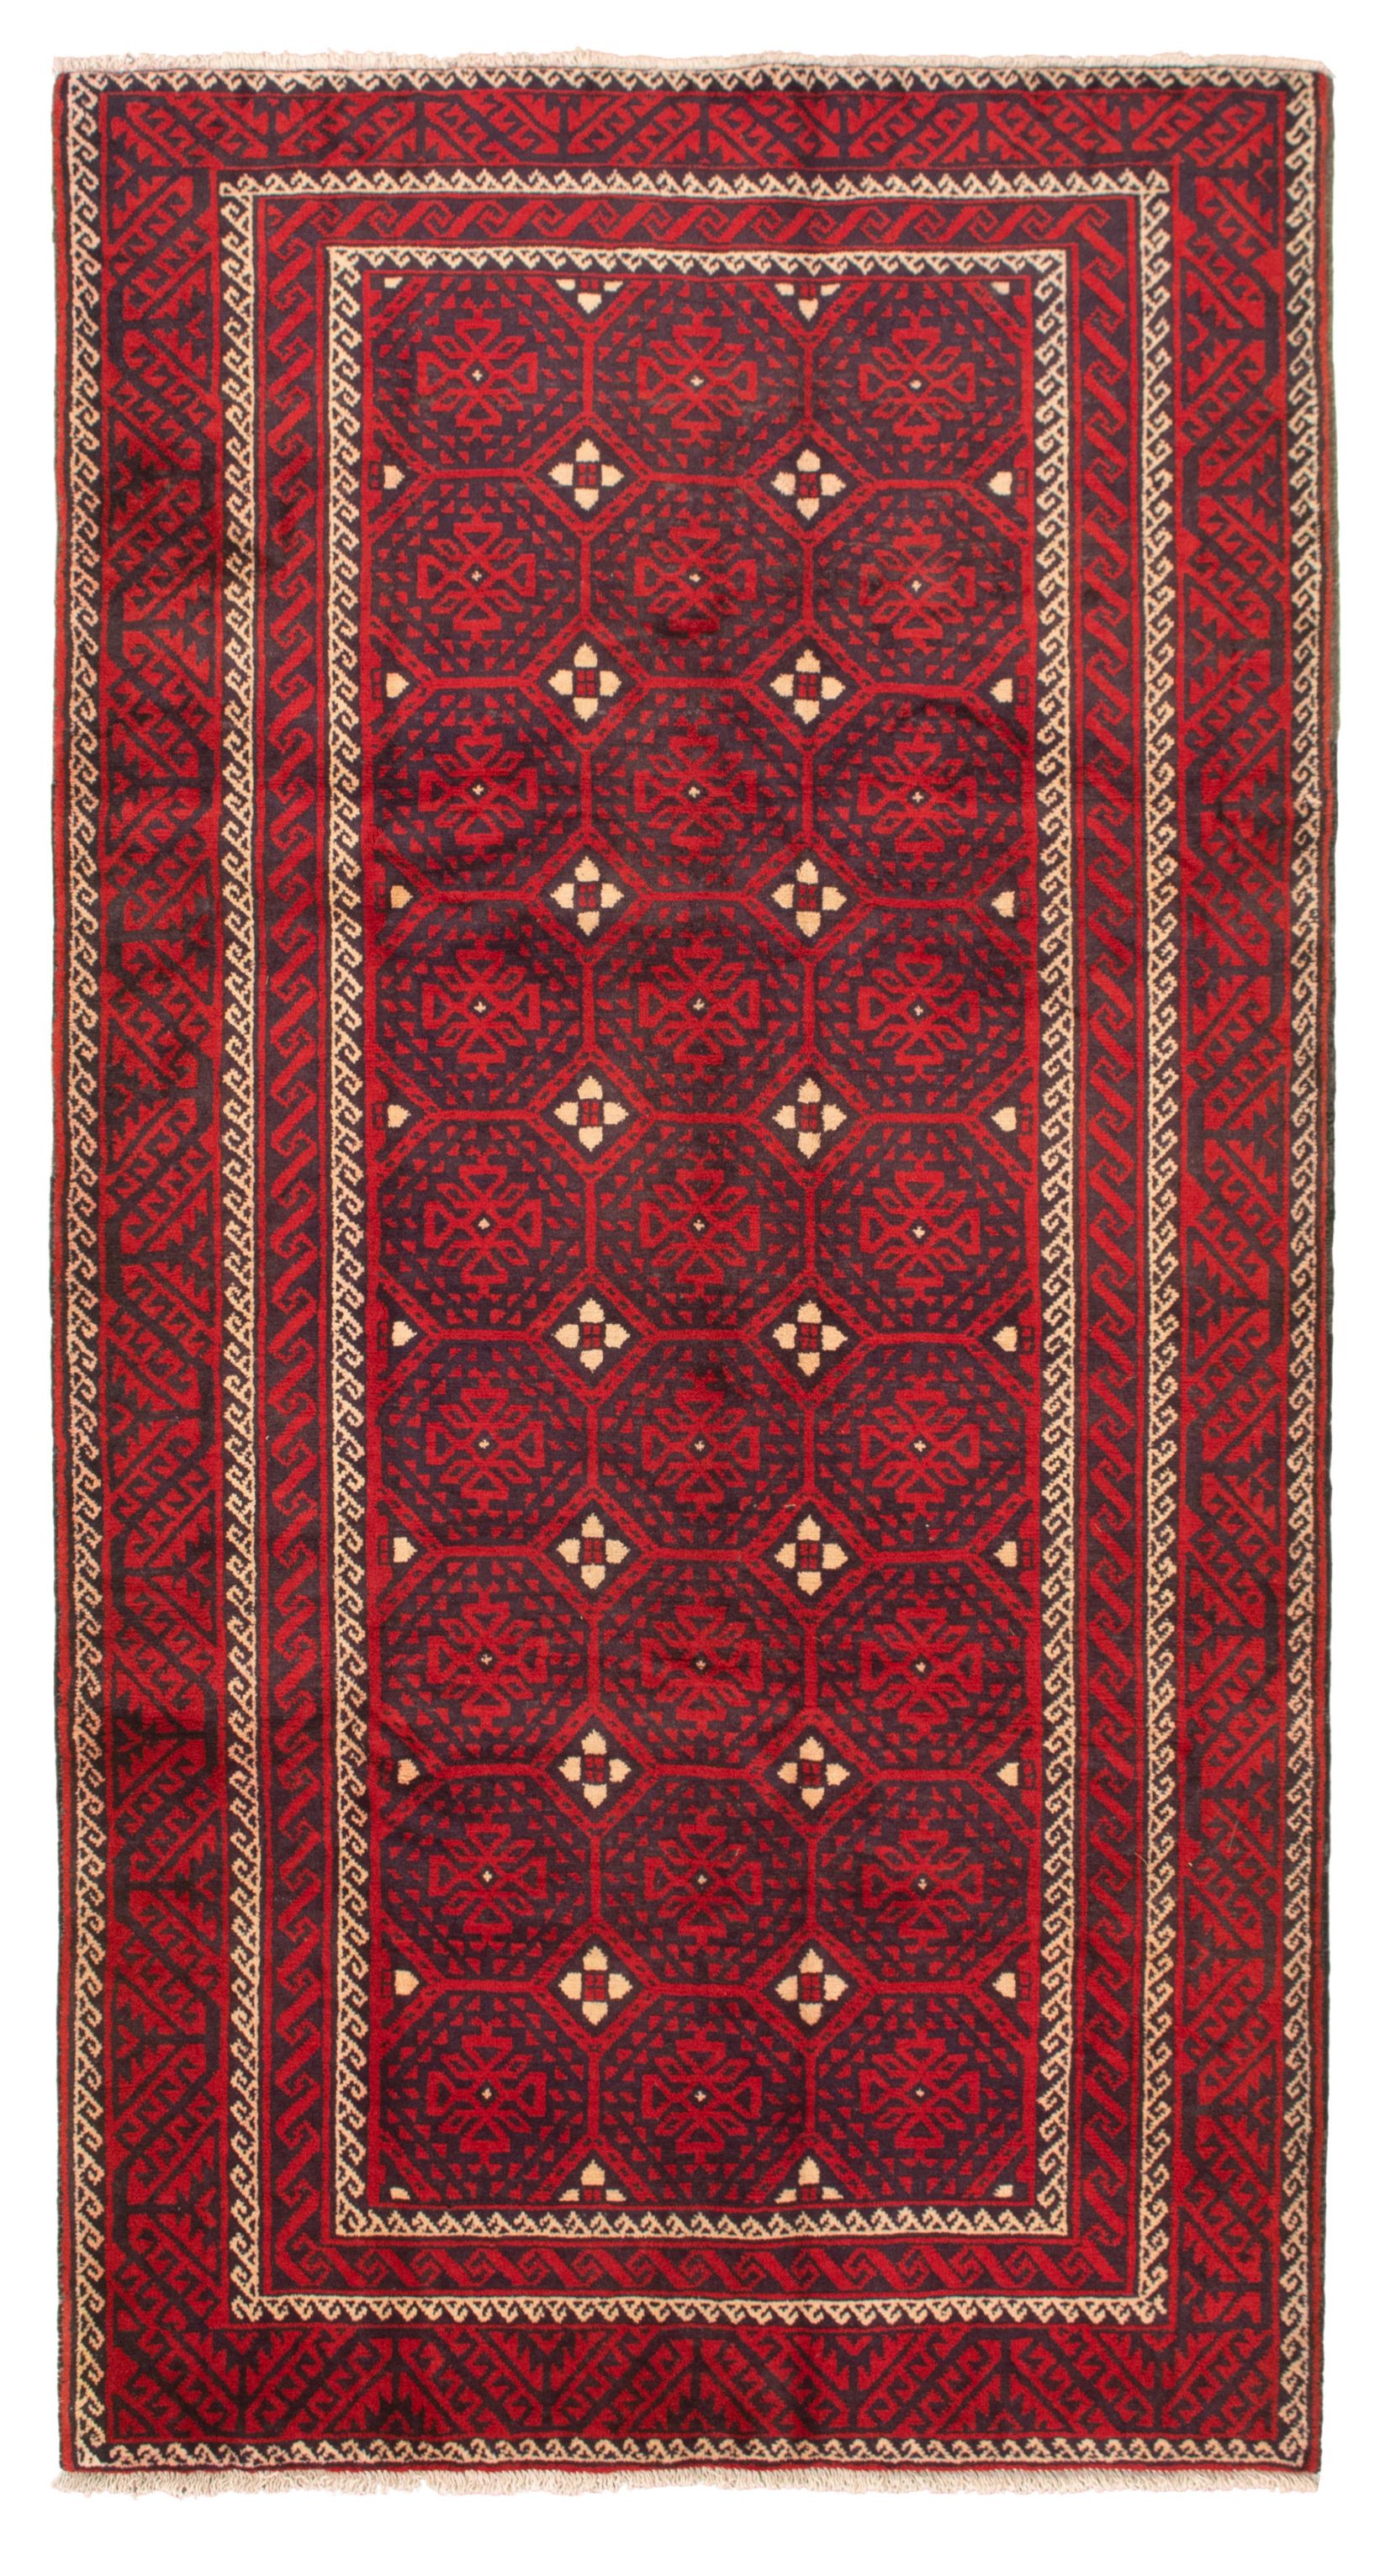 Hand-knotted Authentic Turkish Red Wool Rug 5'3" x 10'4" Size: 5'3" x 10'4"  